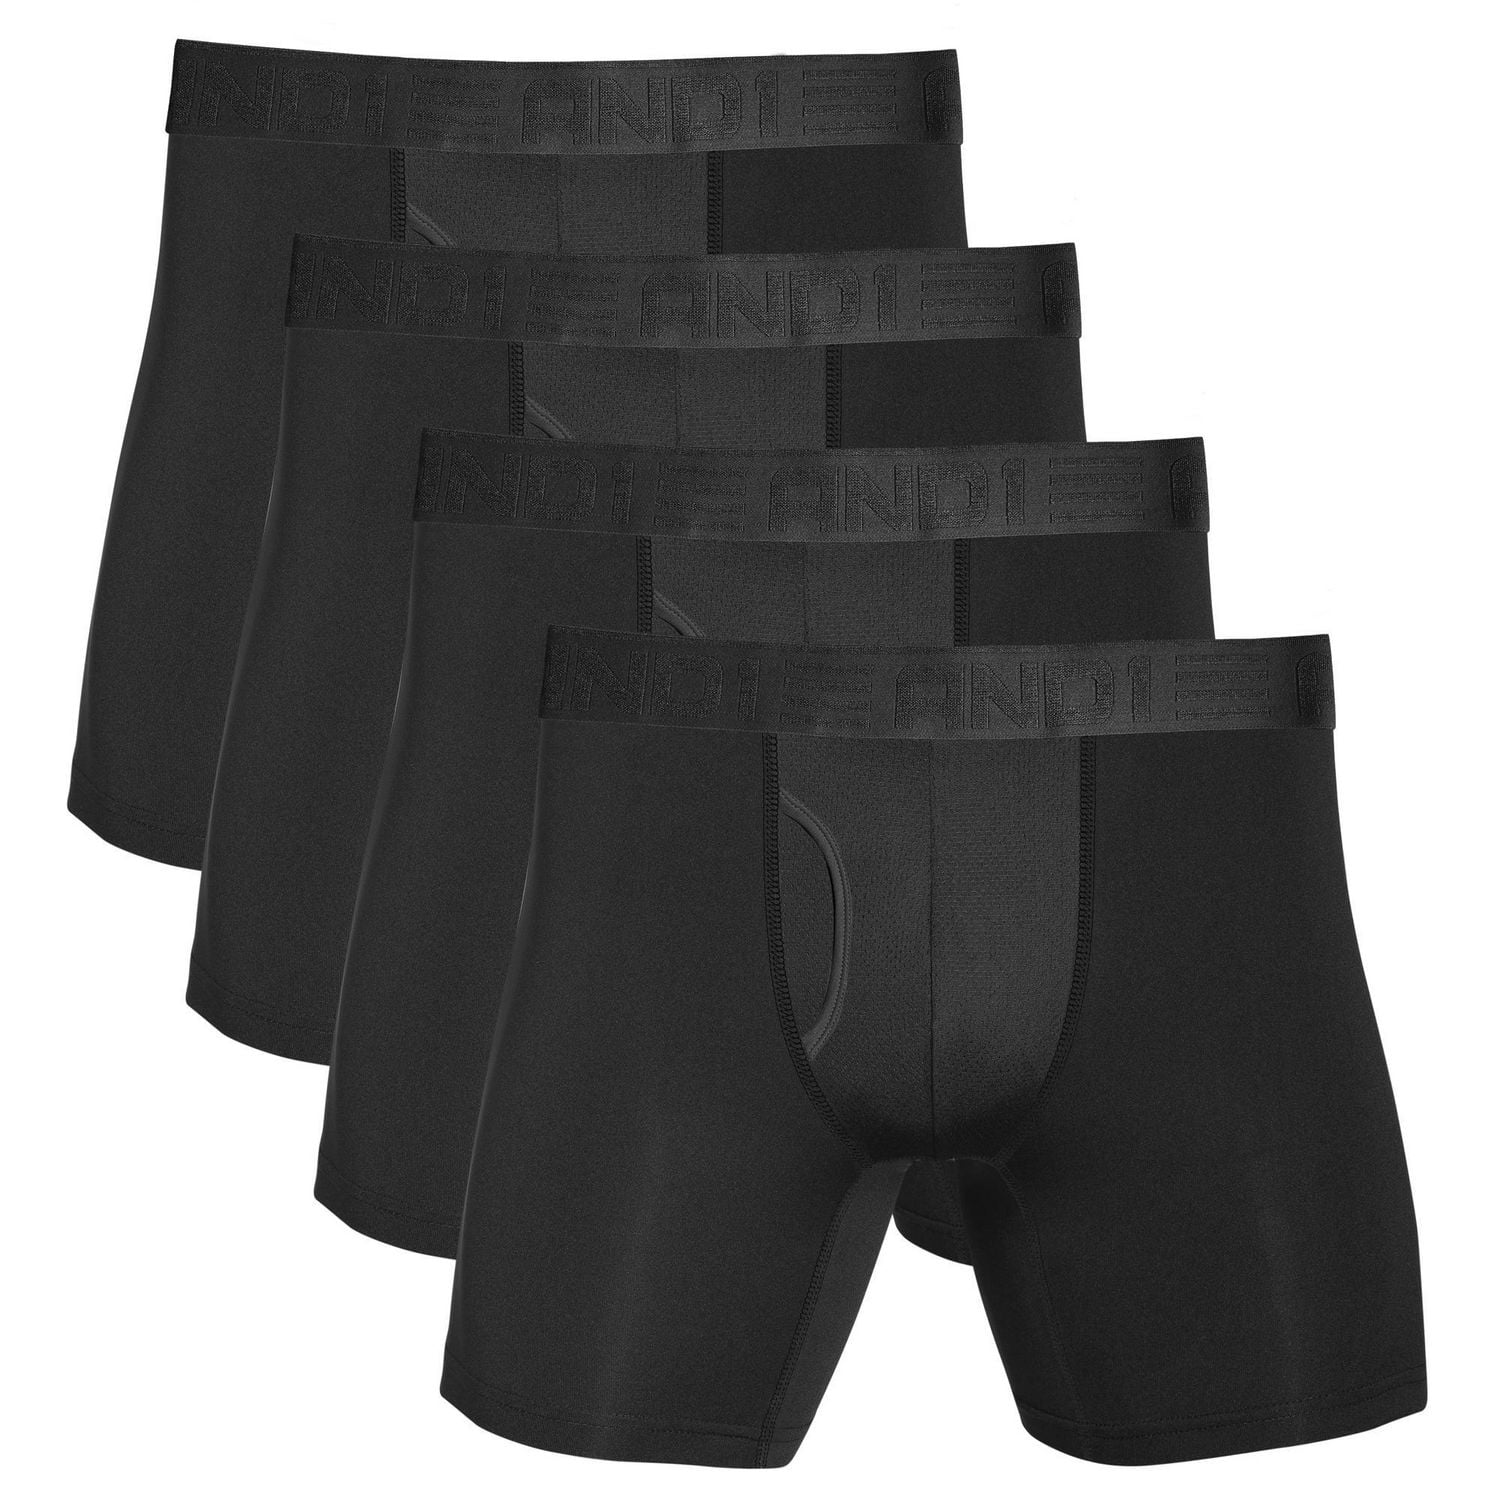  Reebok Men's Underwear - Performance Boxer Briefs with Fly  Pouch (4 Pack), Size Small, Black/Black/Black/Black : Clothing, Shoes &  Jewelry